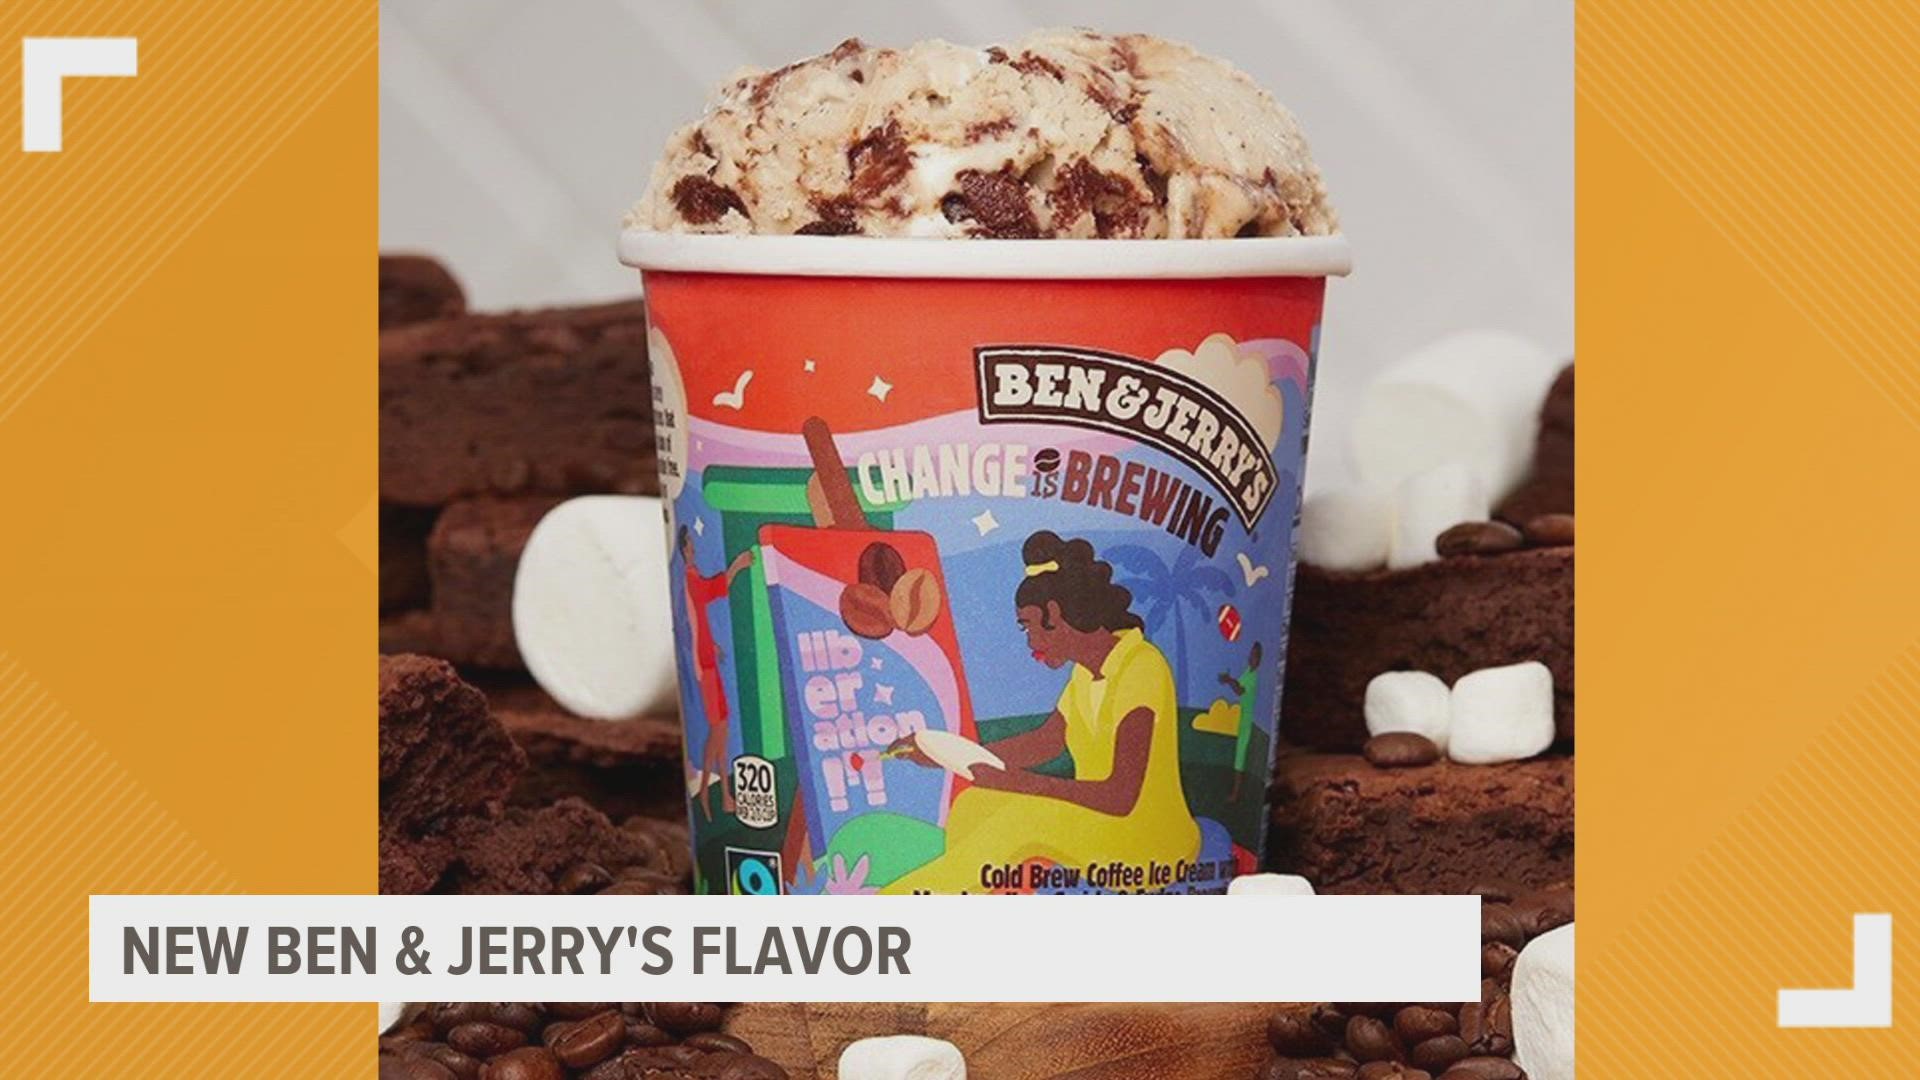 The Des Moines-based coffee company is partnering with Ben & Jerry's to send a message about public safety and liberation.